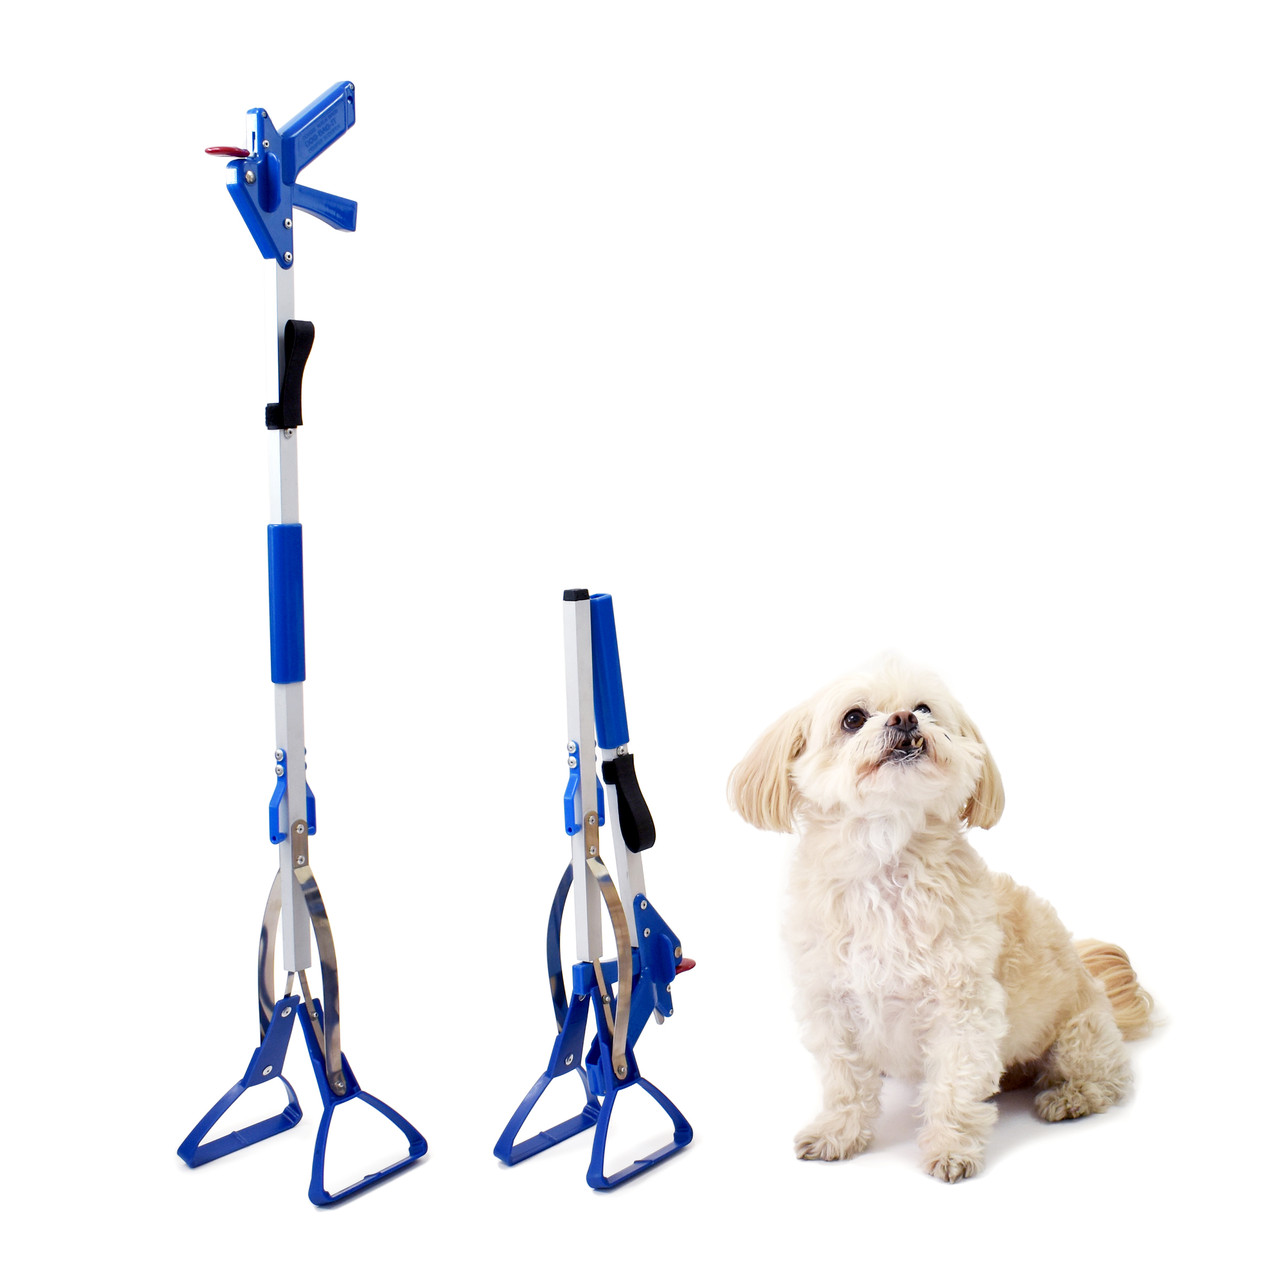 Amazon.com : GoGo Stik XP Totally Clean Pro Pooper Scooper with Bags for  All Dog Pet Waste Cleanup. 37inch. Keeps Hands and Scooper Clean. Use Store  Bags or Heavy Dootie Bags. Unbreakable